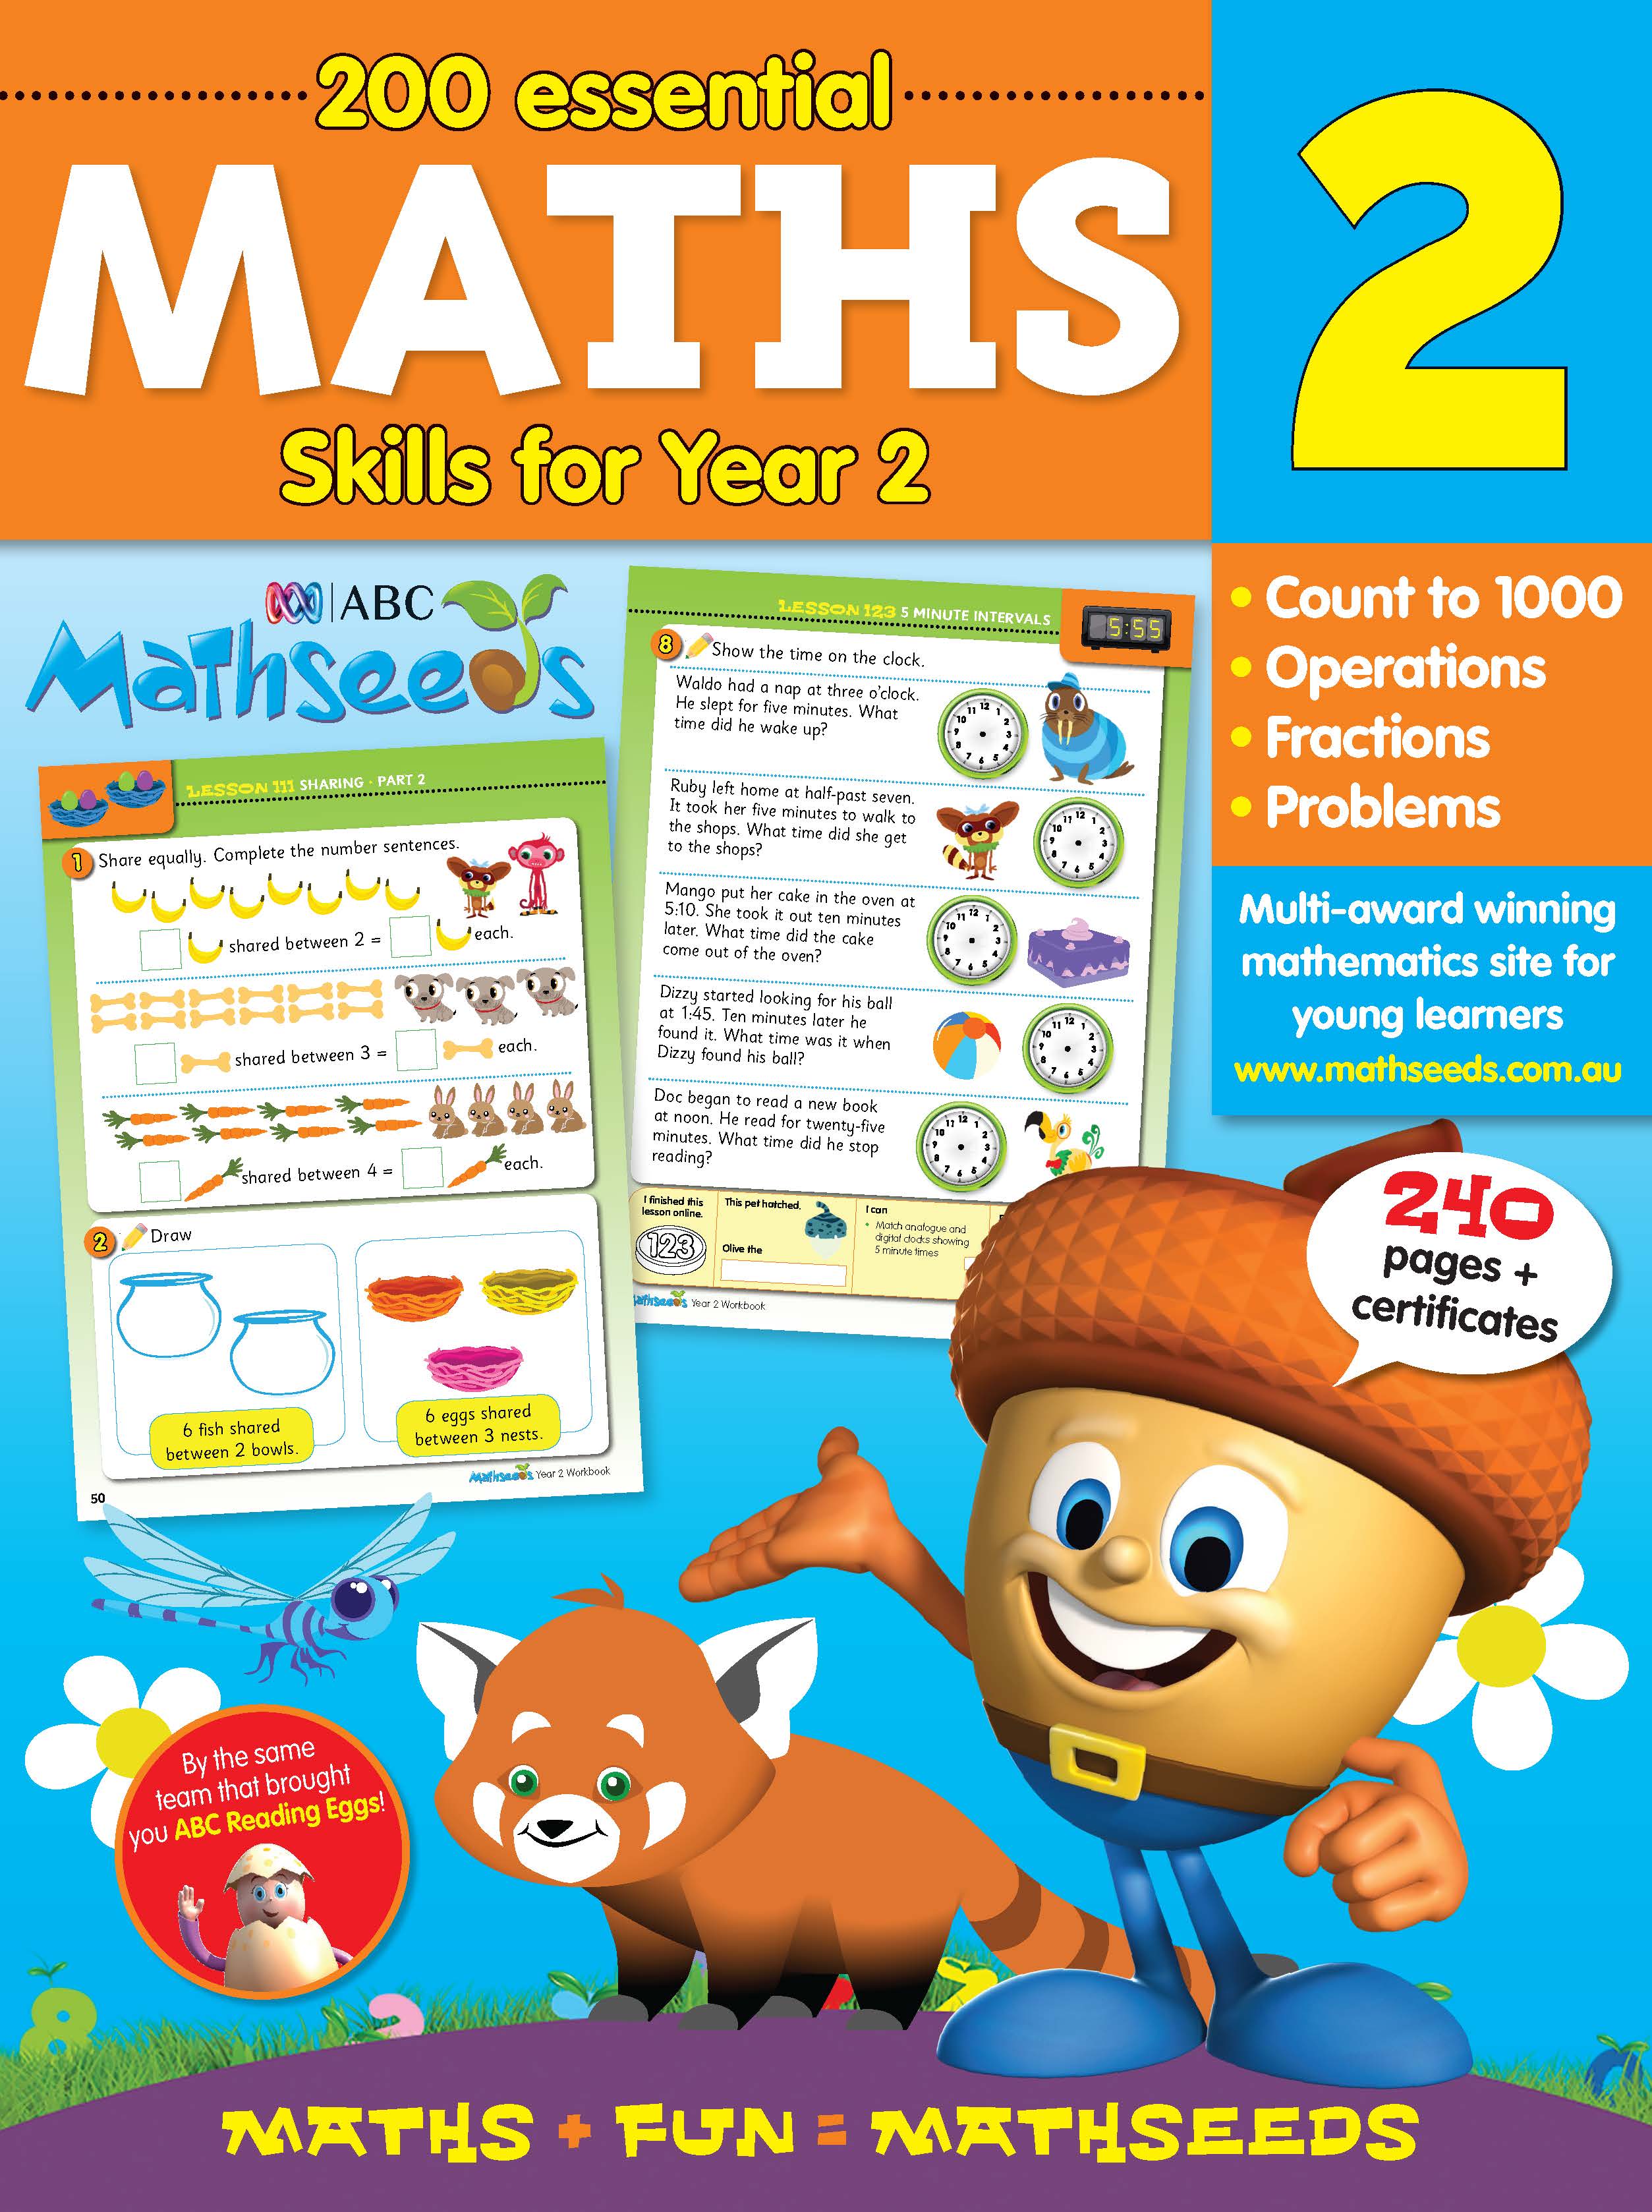 Picture of ABC Mathseeds Maths Skills for Year 2